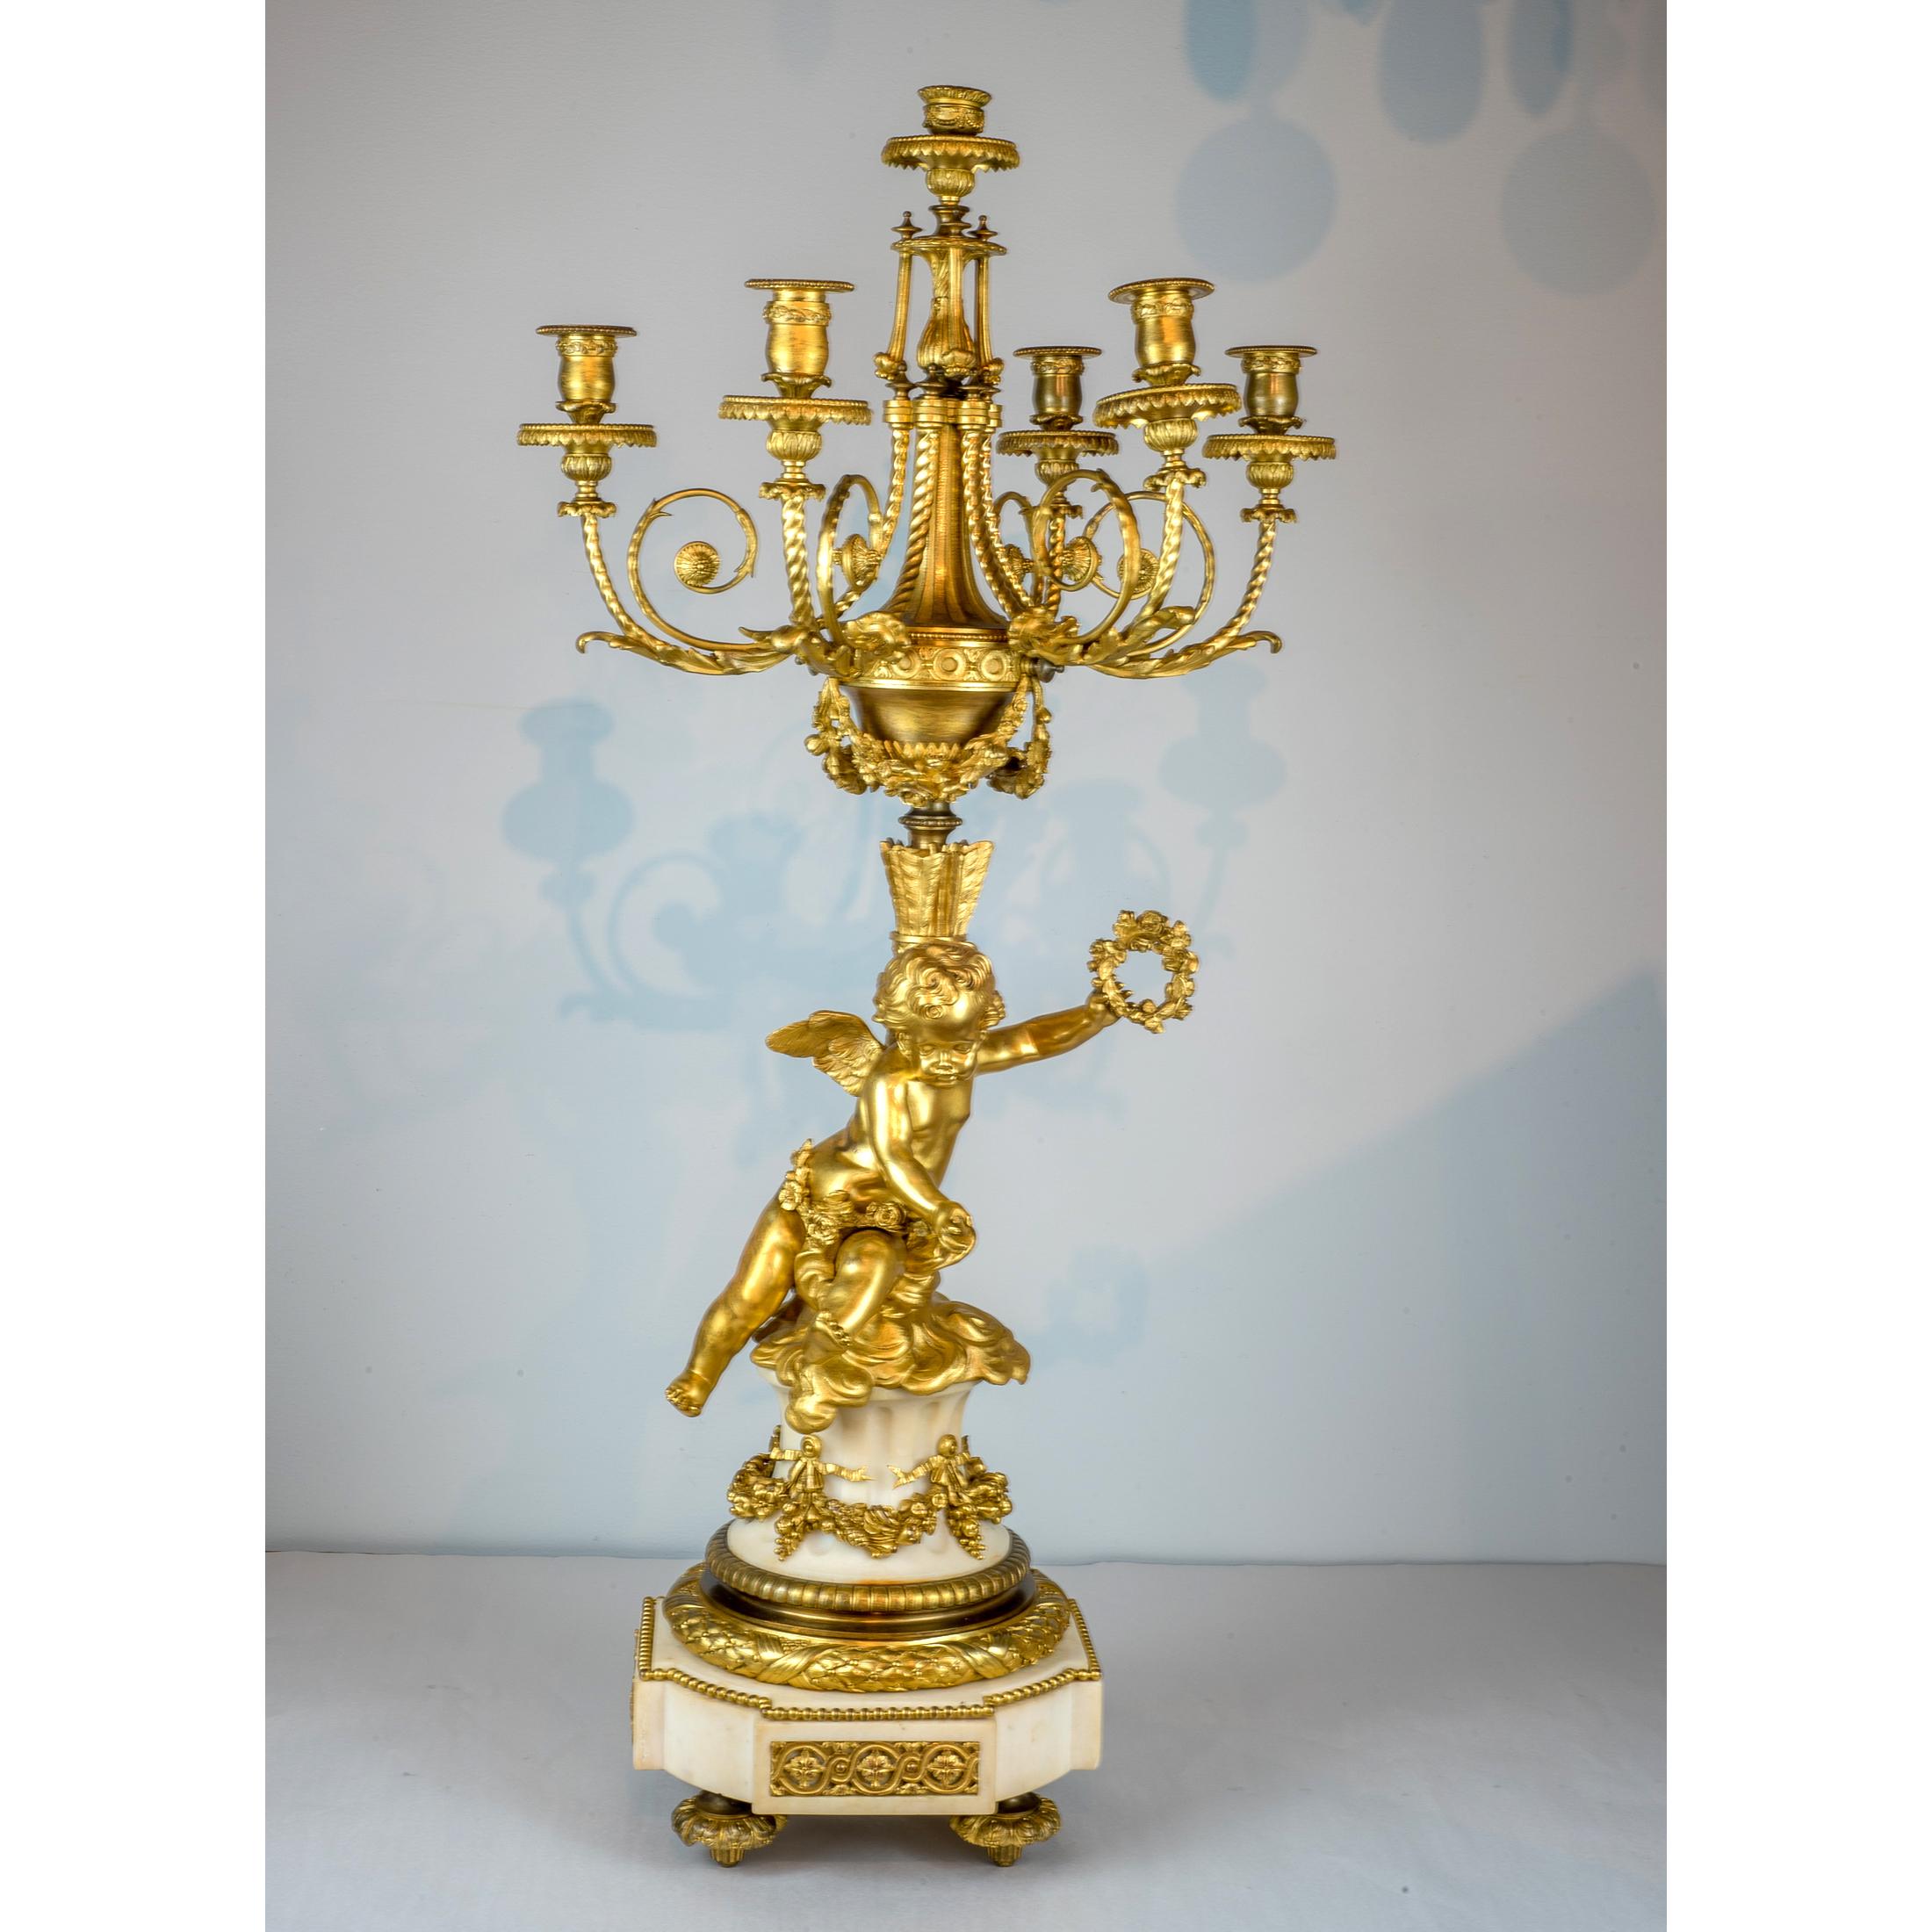 The fine quality pair of gilt bronze and marble candelabras with one cherub holding a garland and the other holding a torch.

Origin: French
Date: 19th century
Dimension: 35 in. x 16 3/4 in.